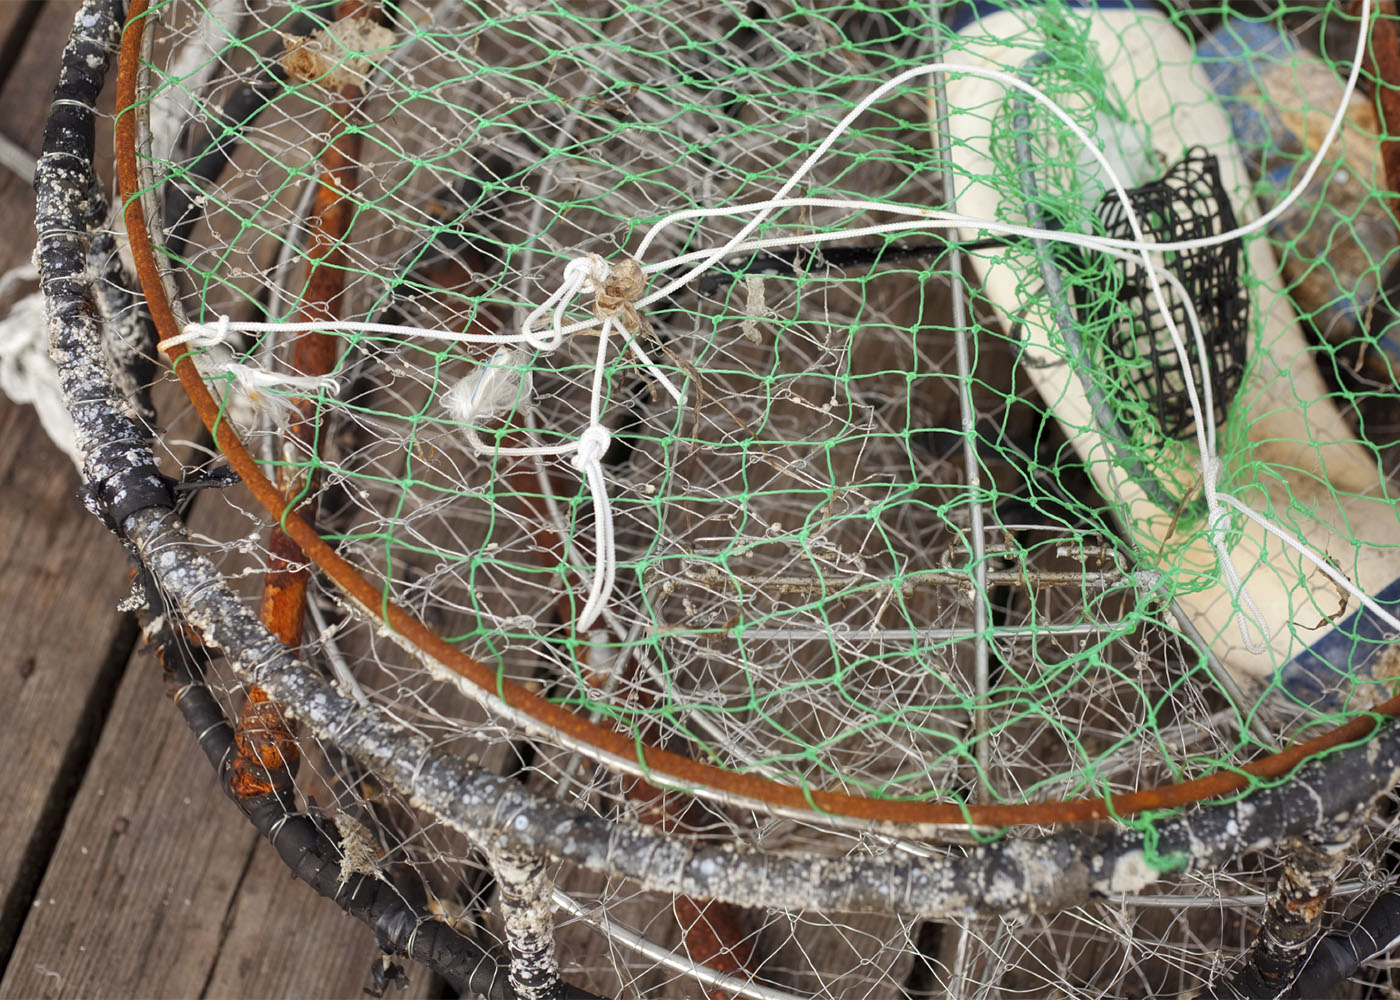 Aquaculture – Fishing for answers on fish farming | FOODWISE